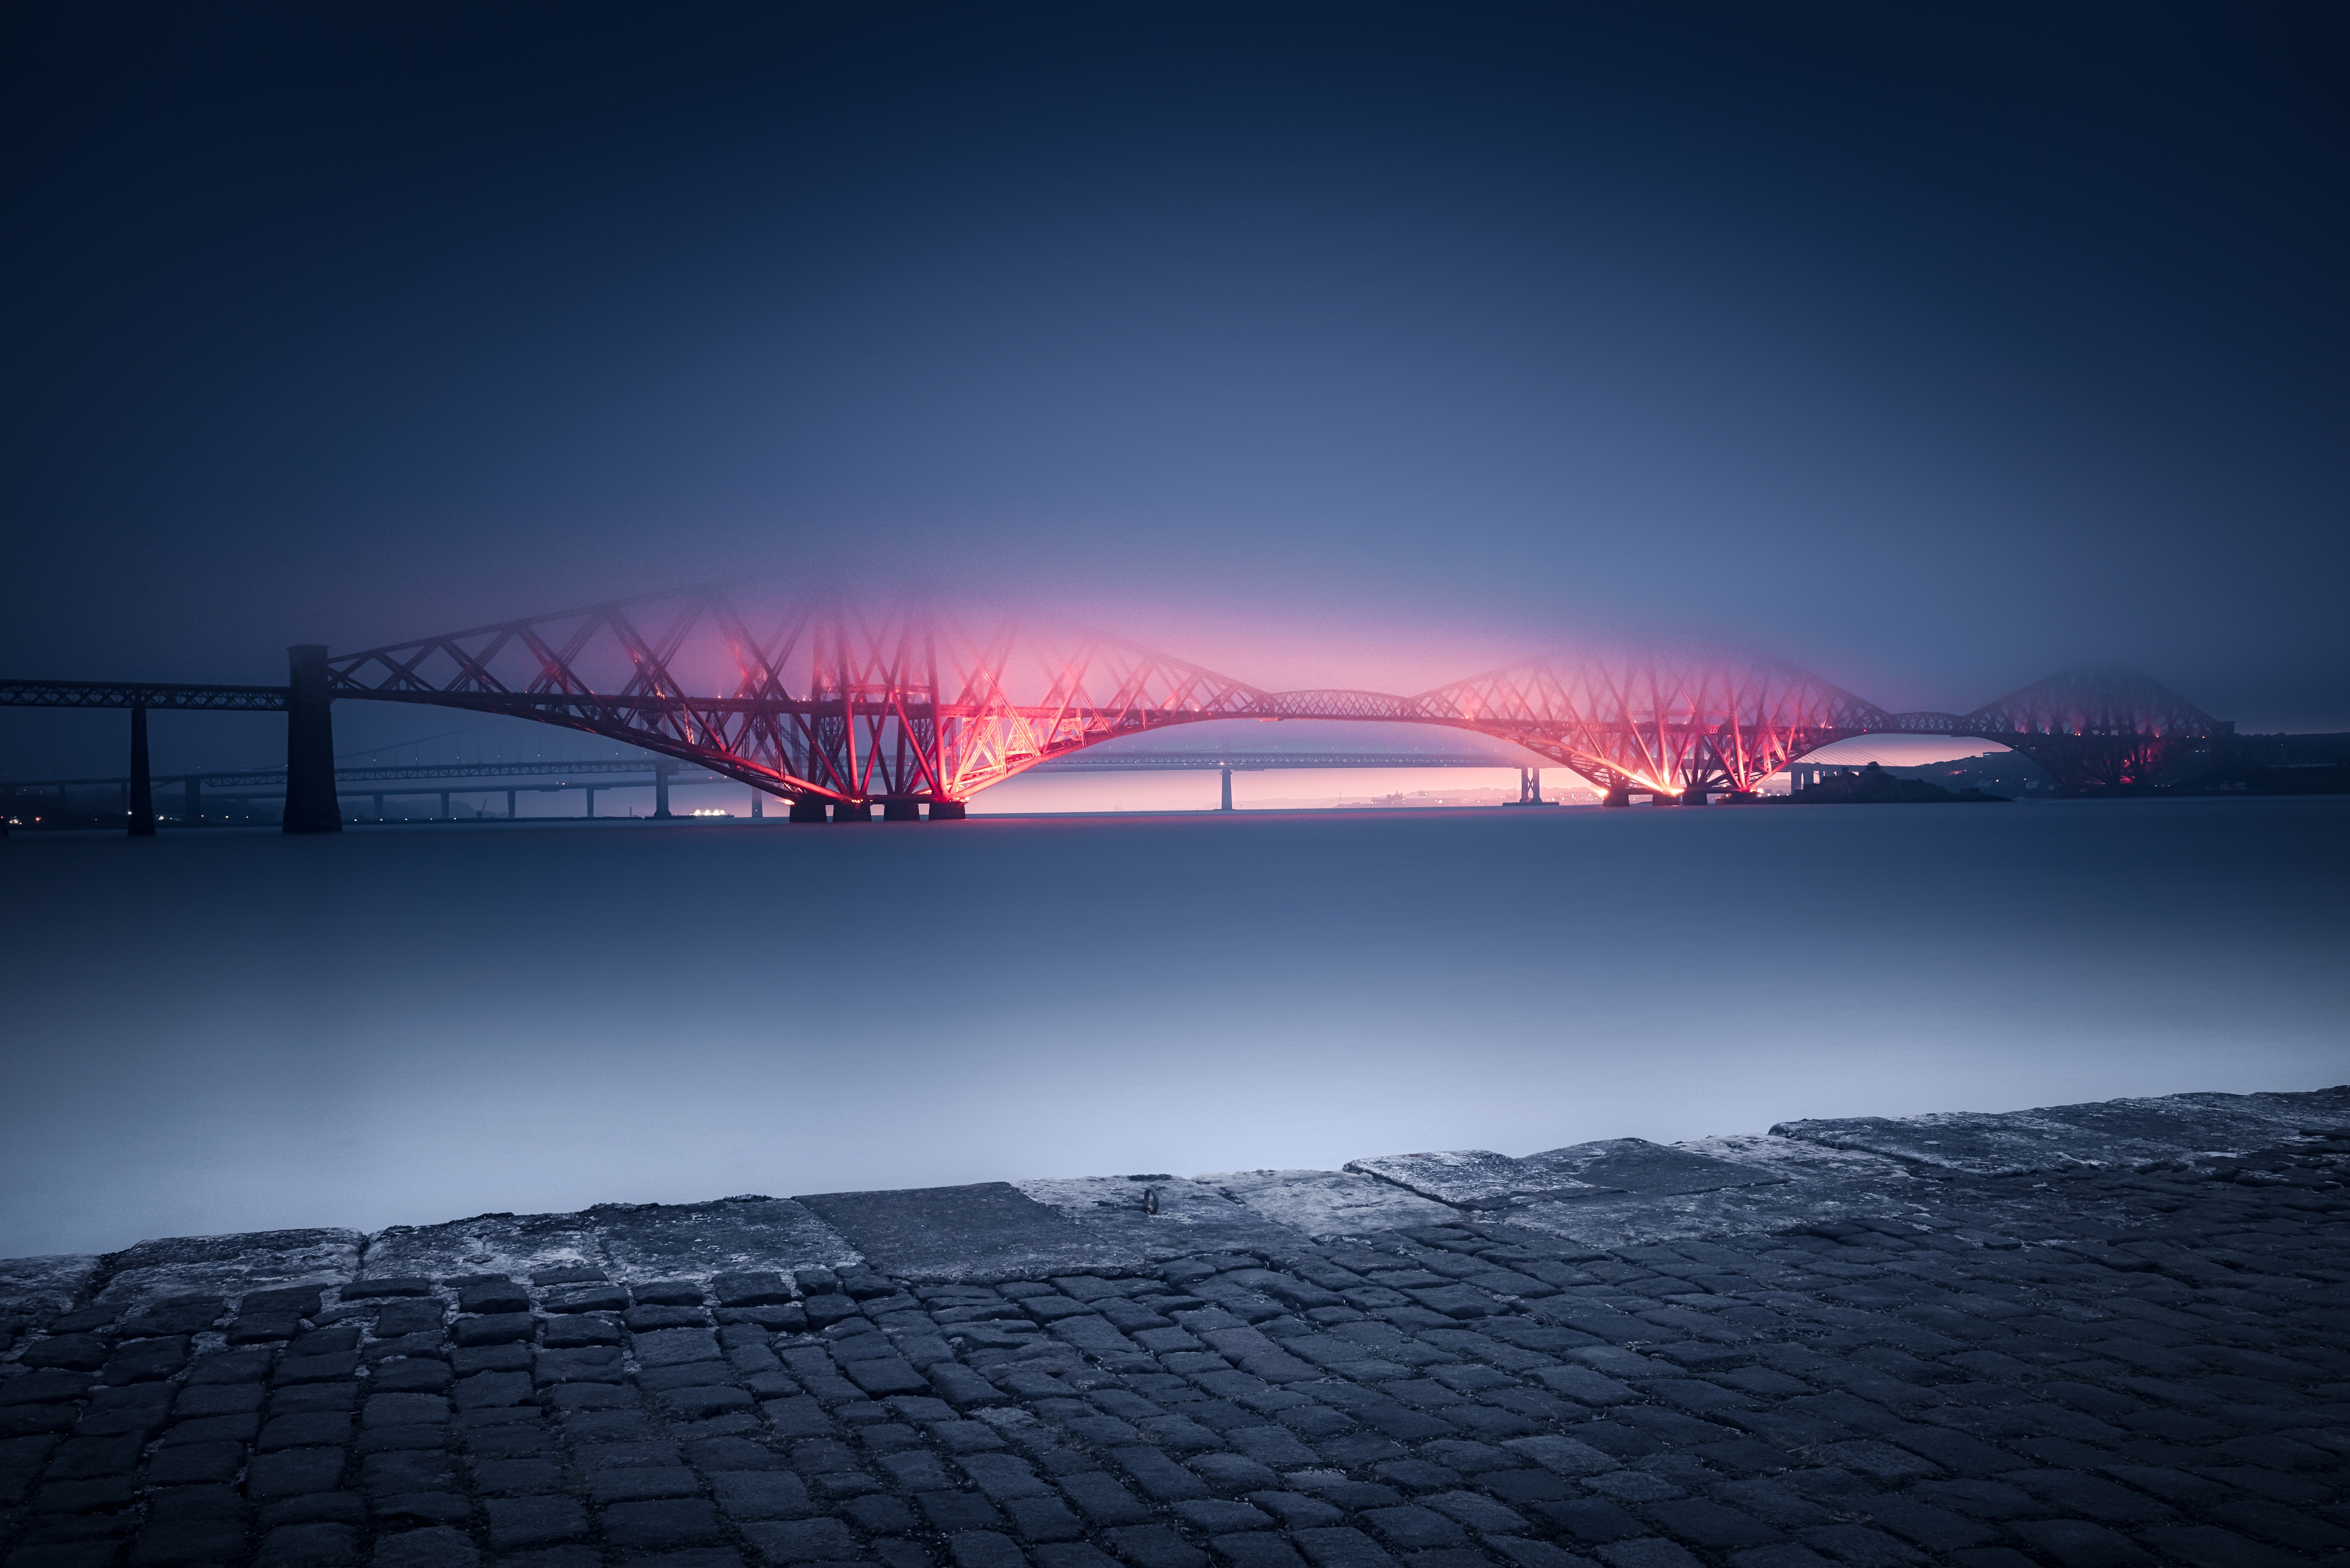 Scottish Bridge is illuminated with red light during sunset in the fog